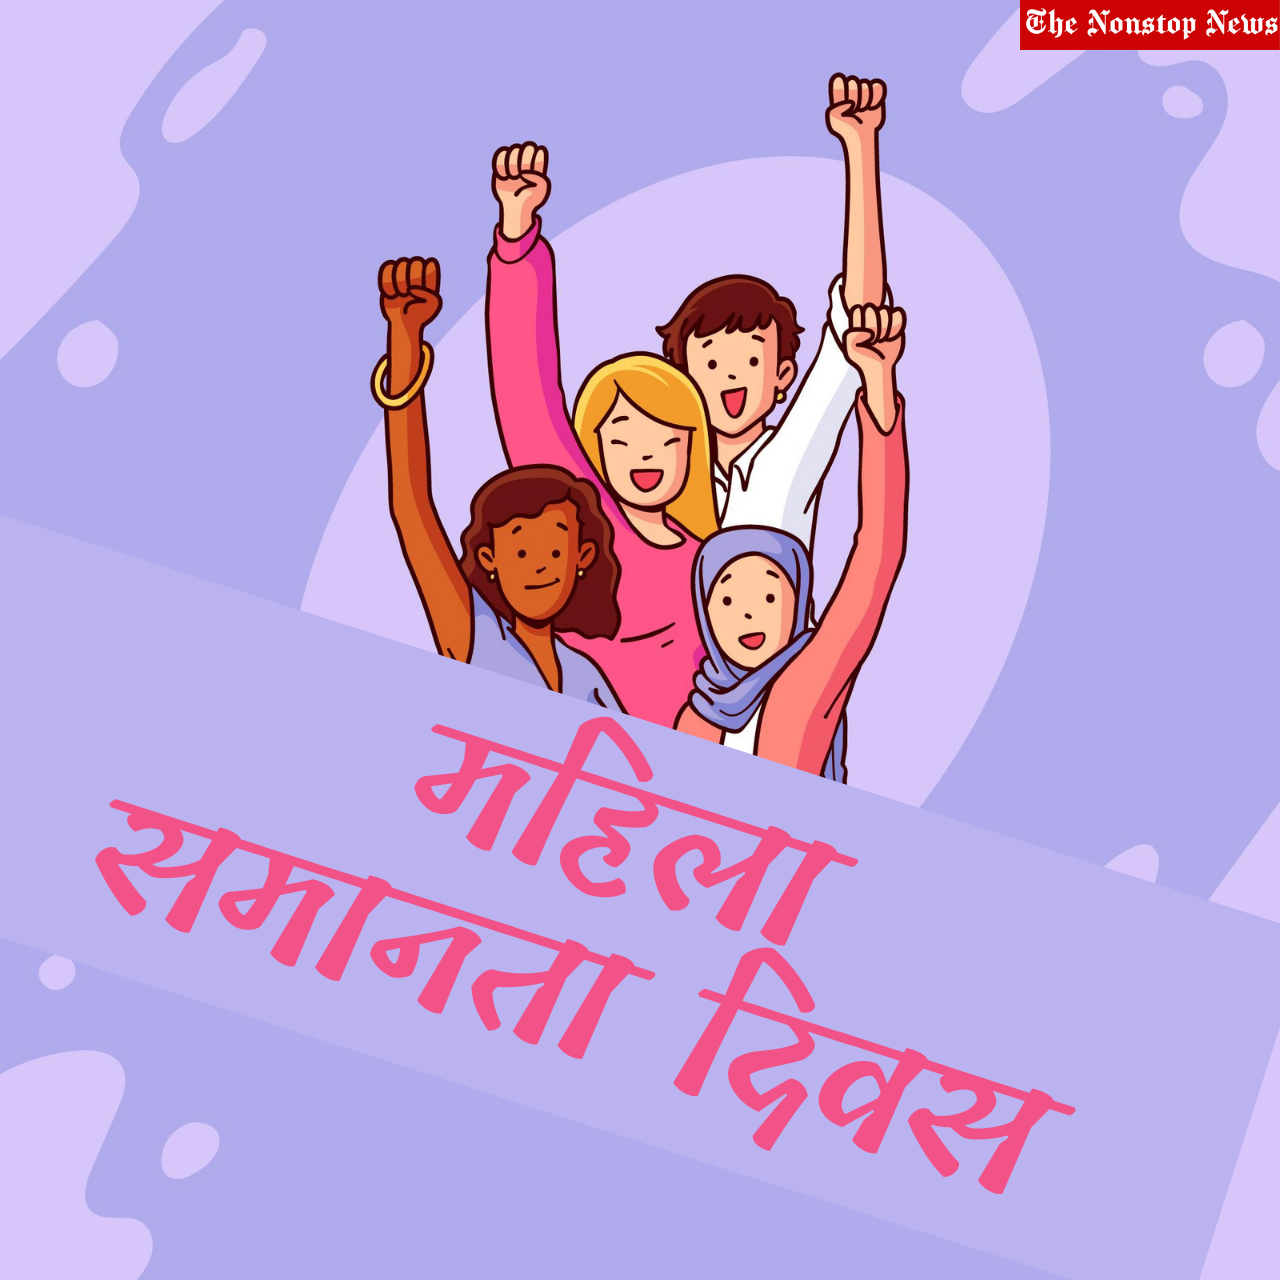 Women's Equality Day 2021 Hindi Quotes, Images, Messages, Wishes, and Greetings to share